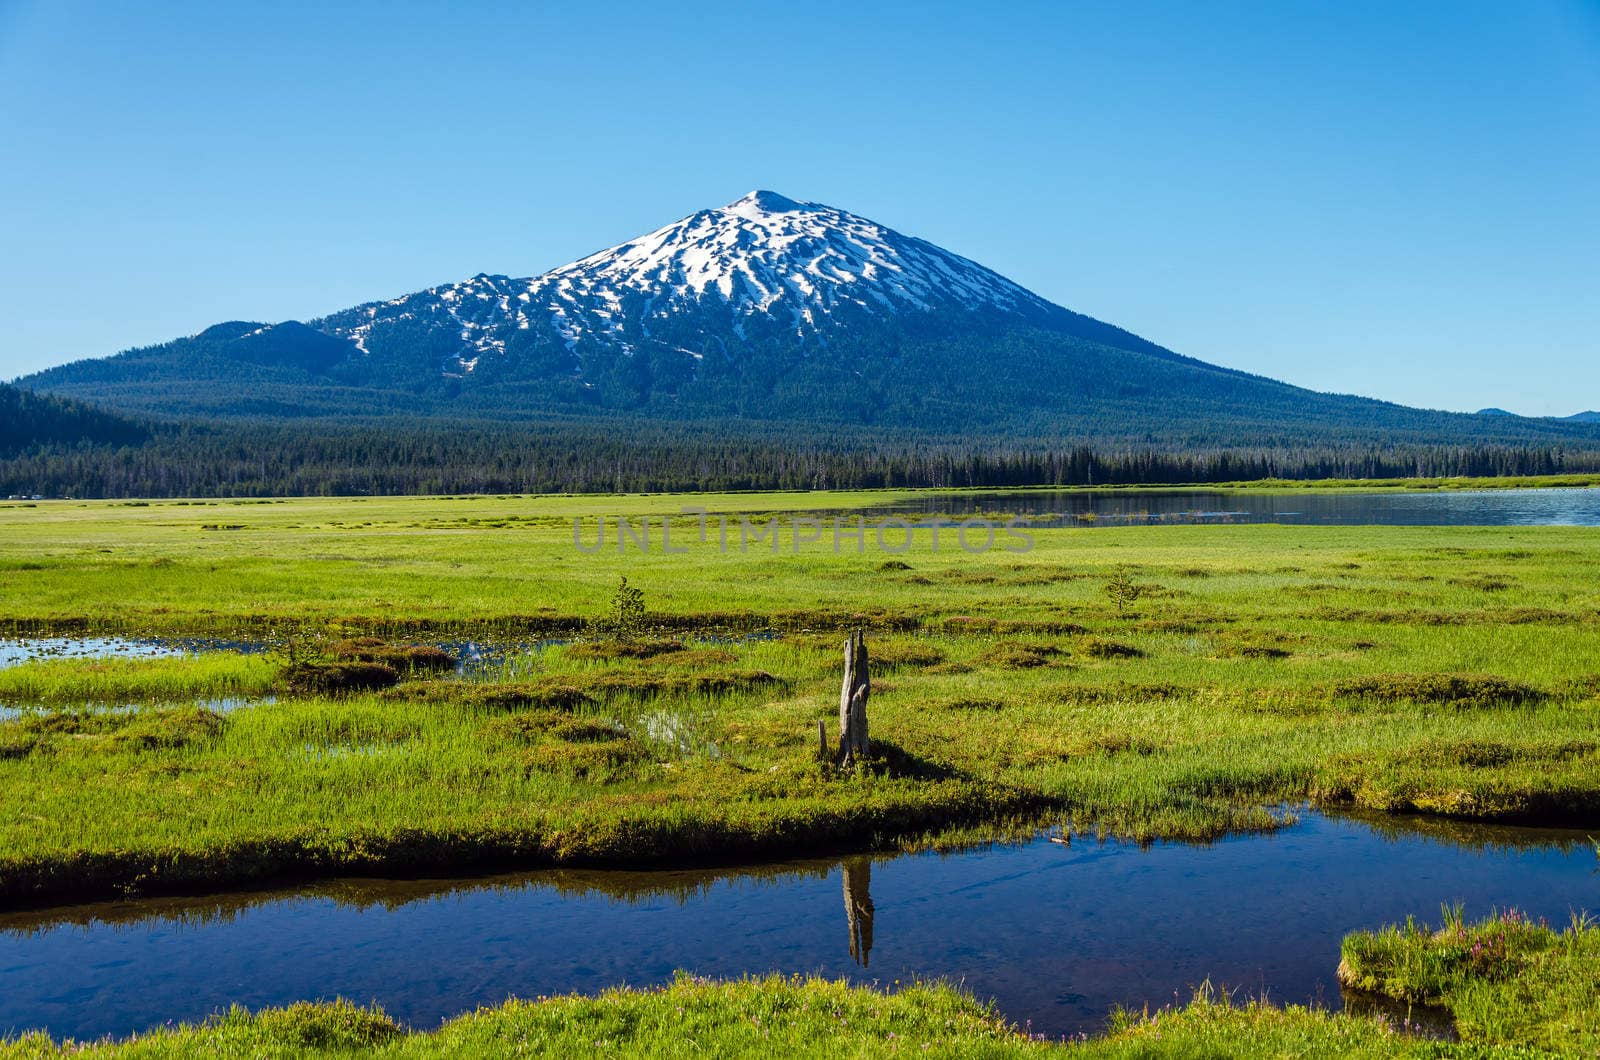 Mount Bachelor viewed from a lush green meadow in Central Oregon